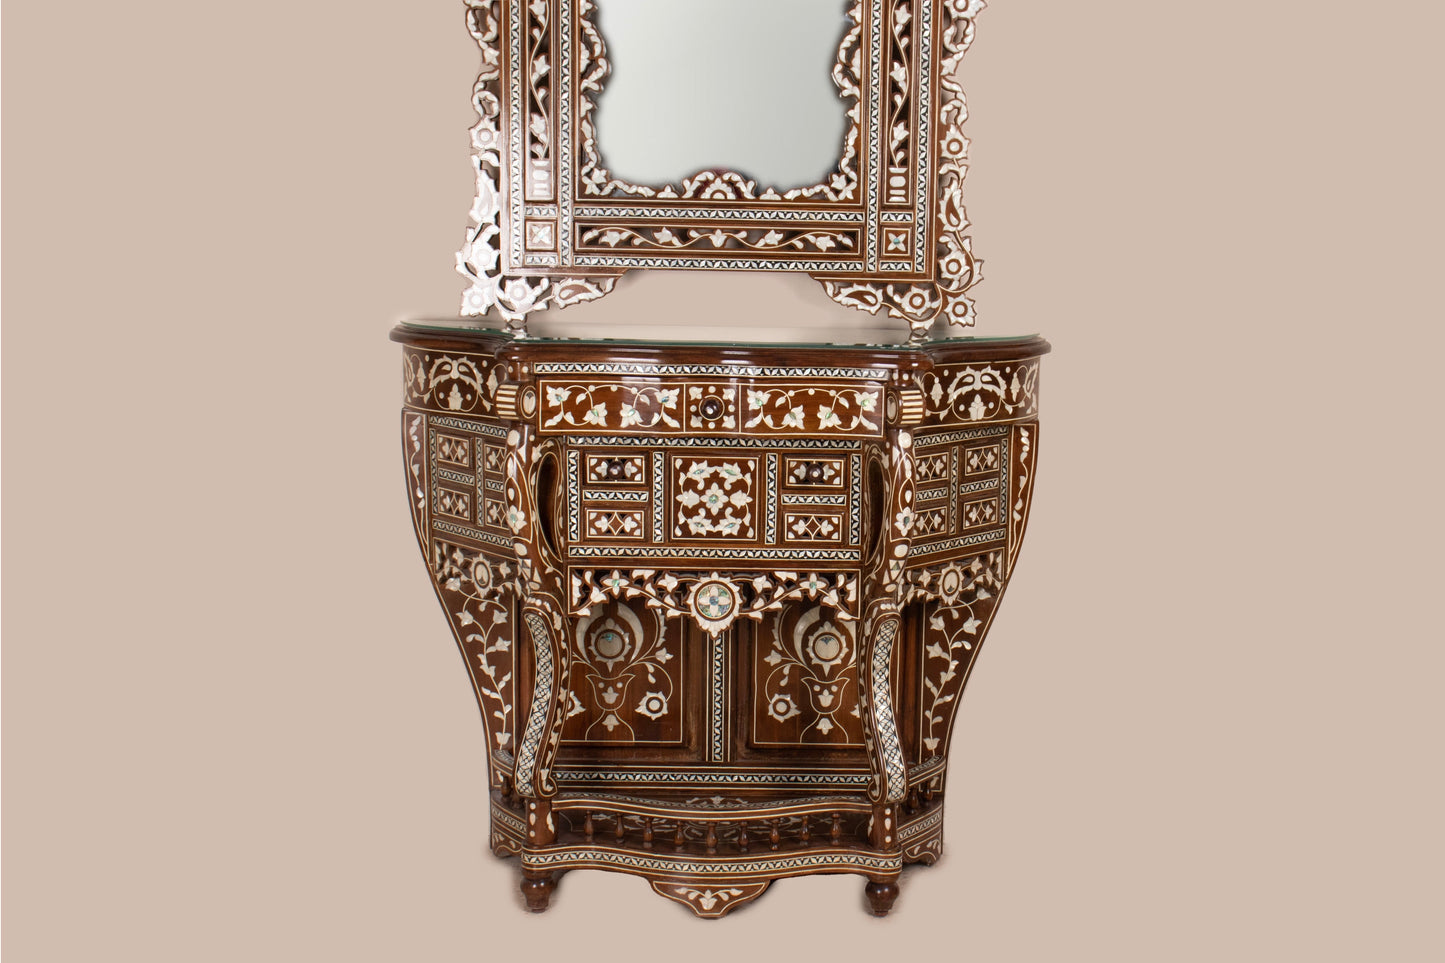 Dresser & Mirror Set - Floral pattern in Mother of Pearl